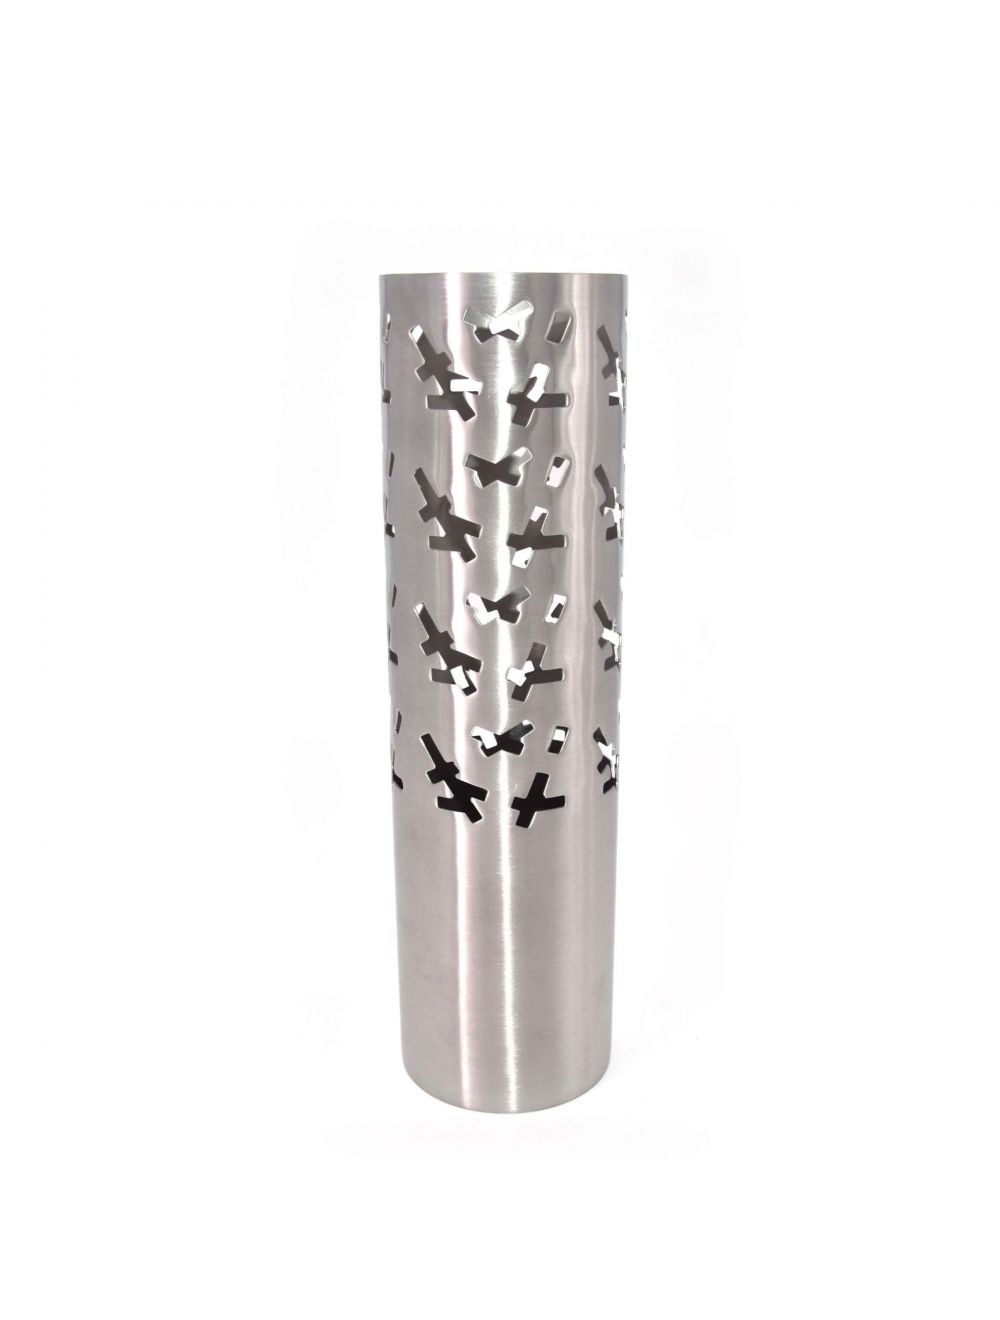 Steel Pipe Shaped Flower Vase With Designs Using Holes